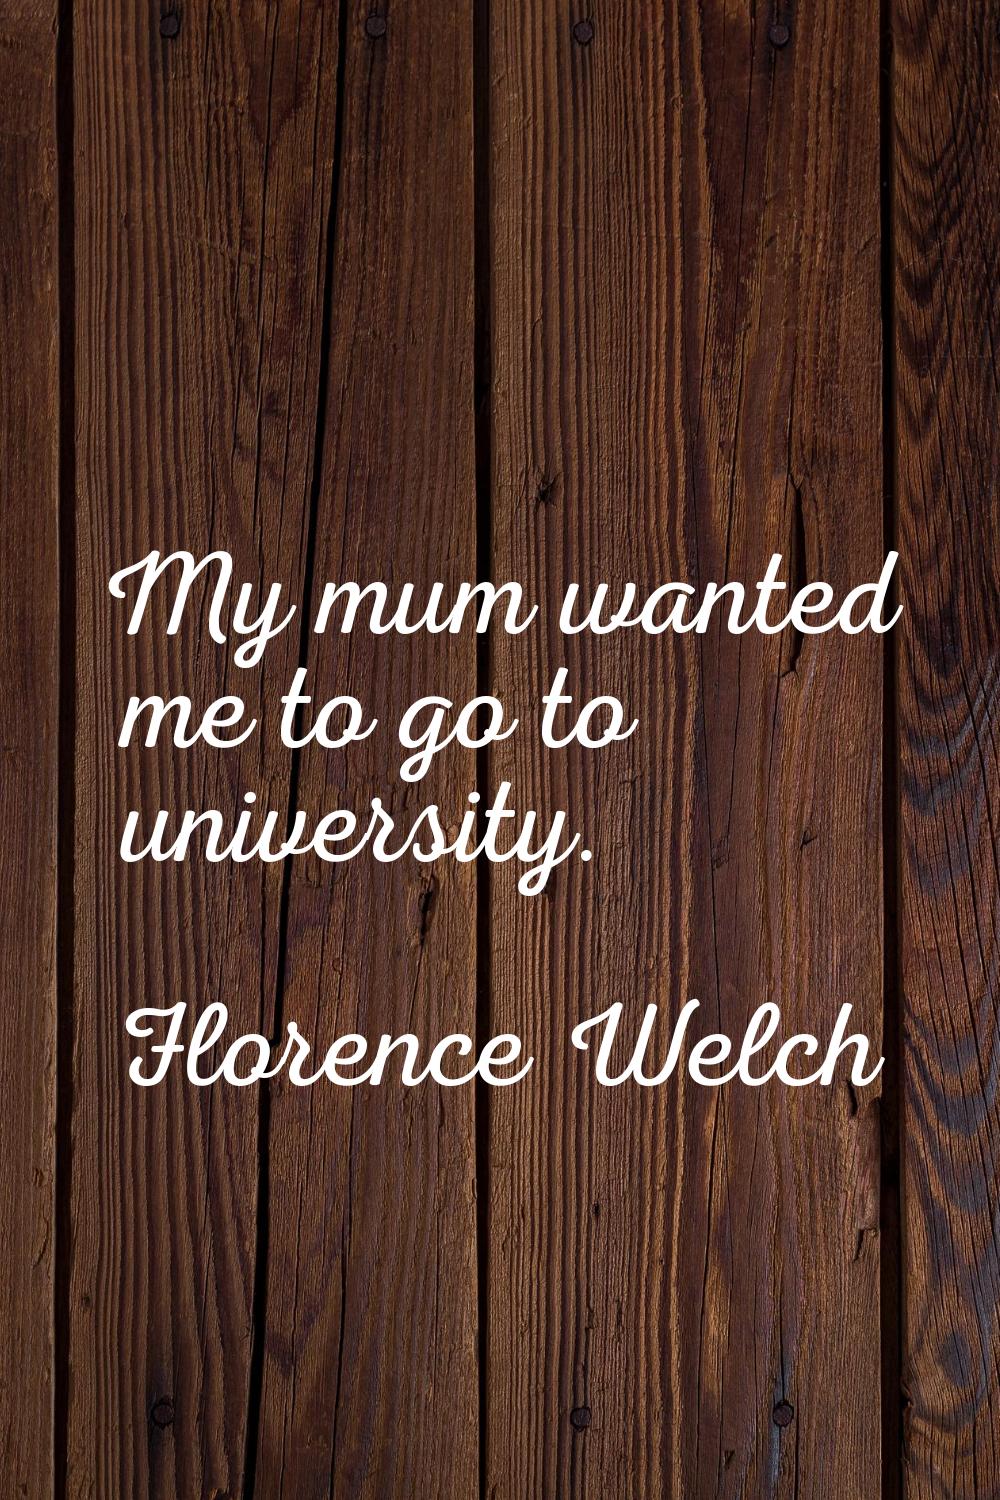 My mum wanted me to go to university.